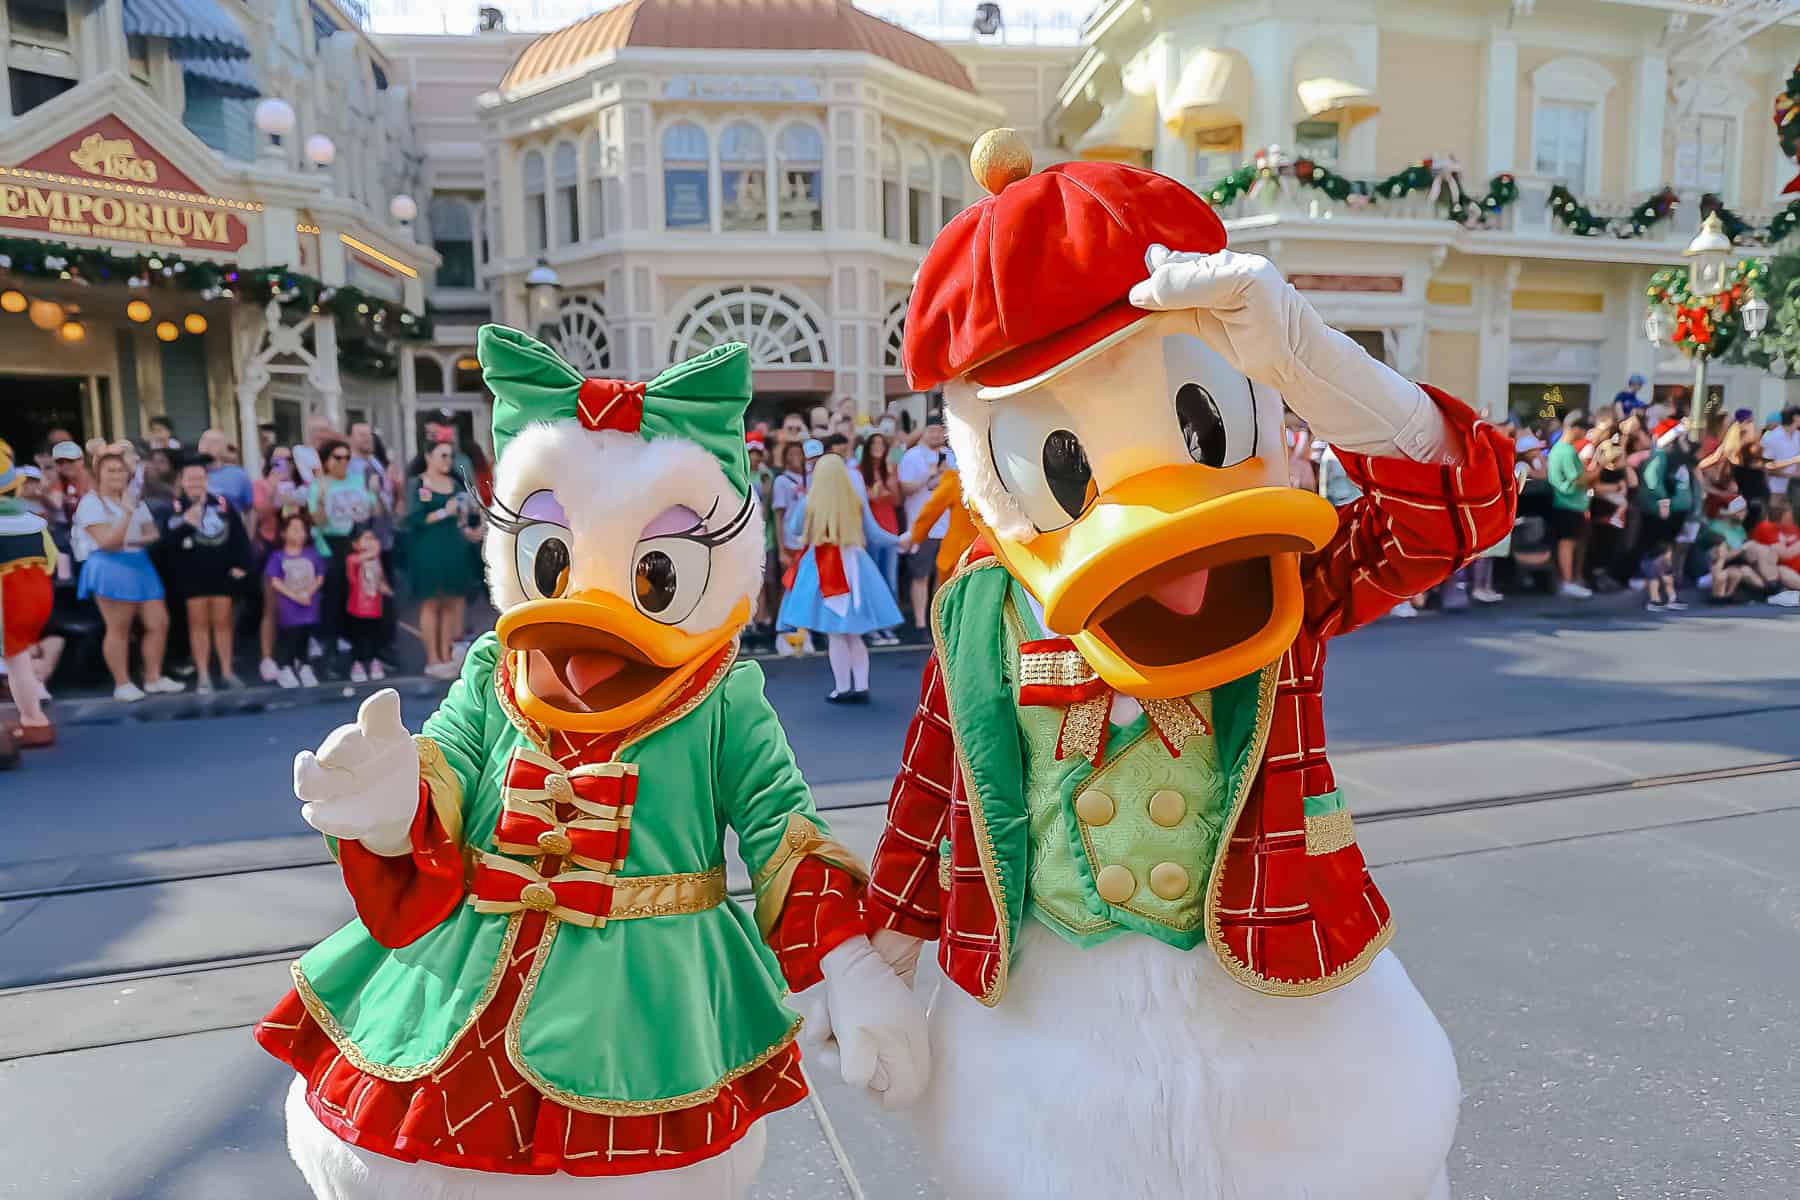 Donald tipping his hat in the parade with Daisy at his side. 